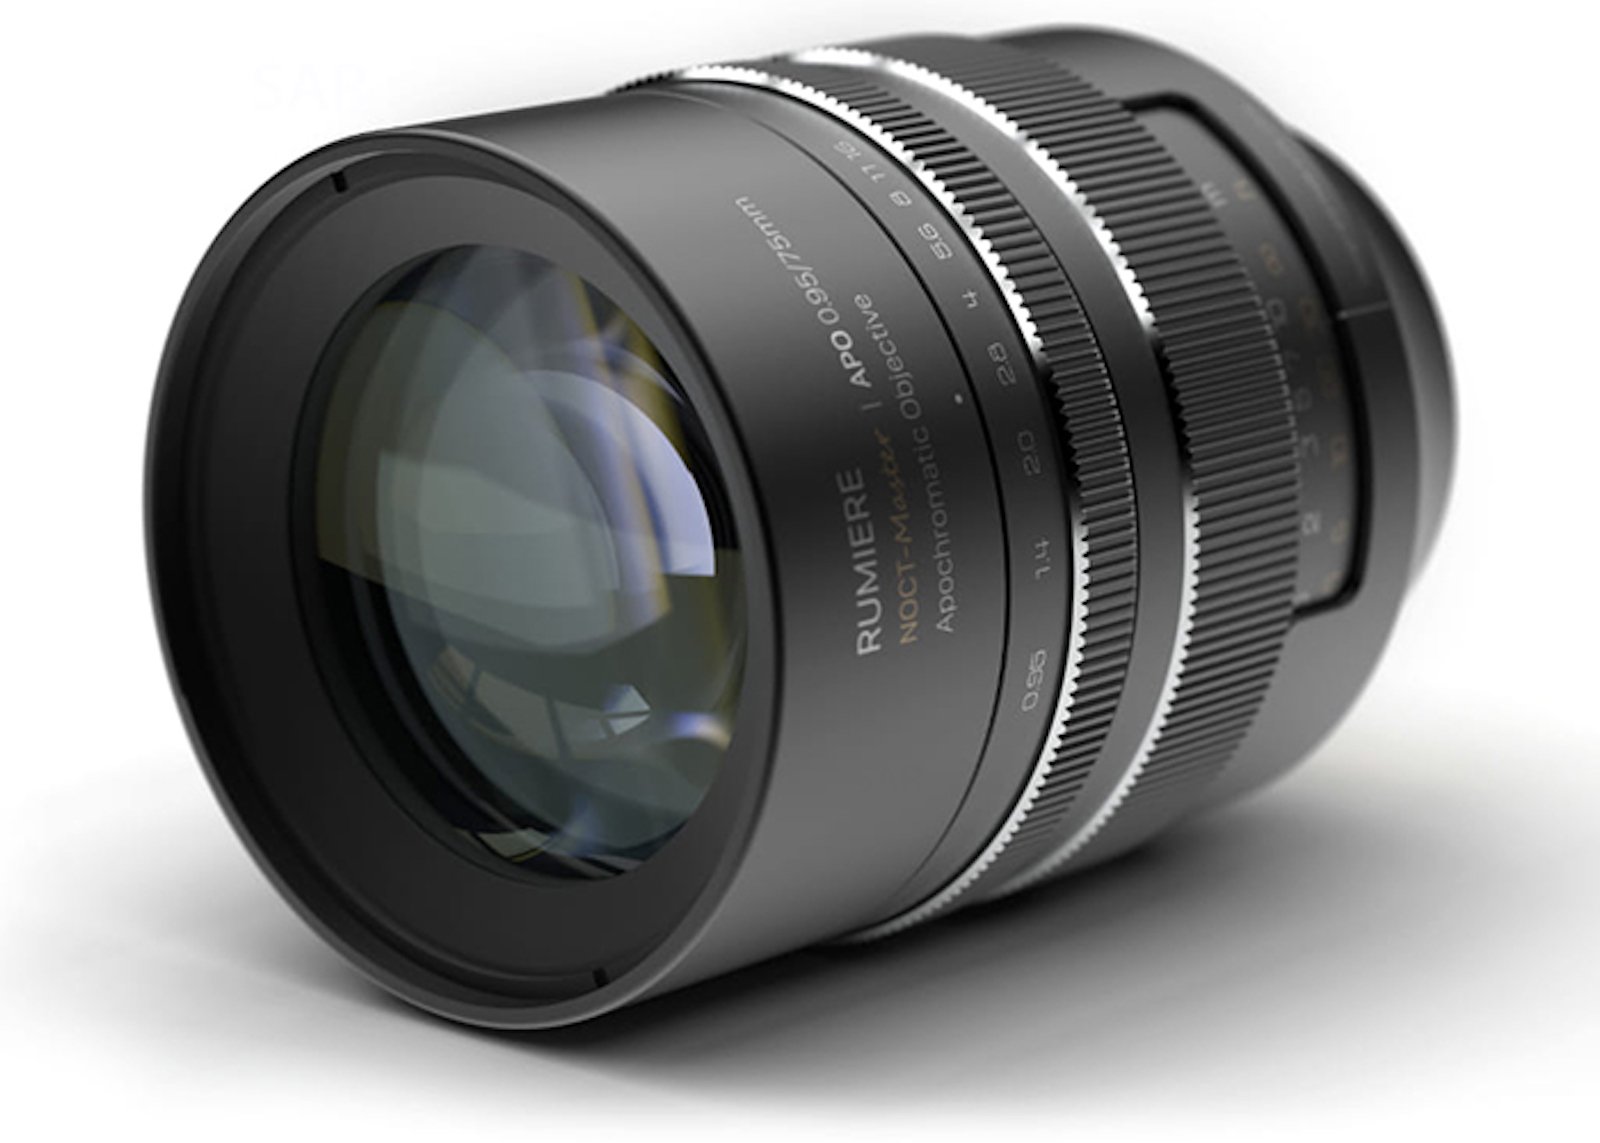 NiSi Working On 75mm f/0.95 NOCT-Master Lens, Will Nikon Sue?